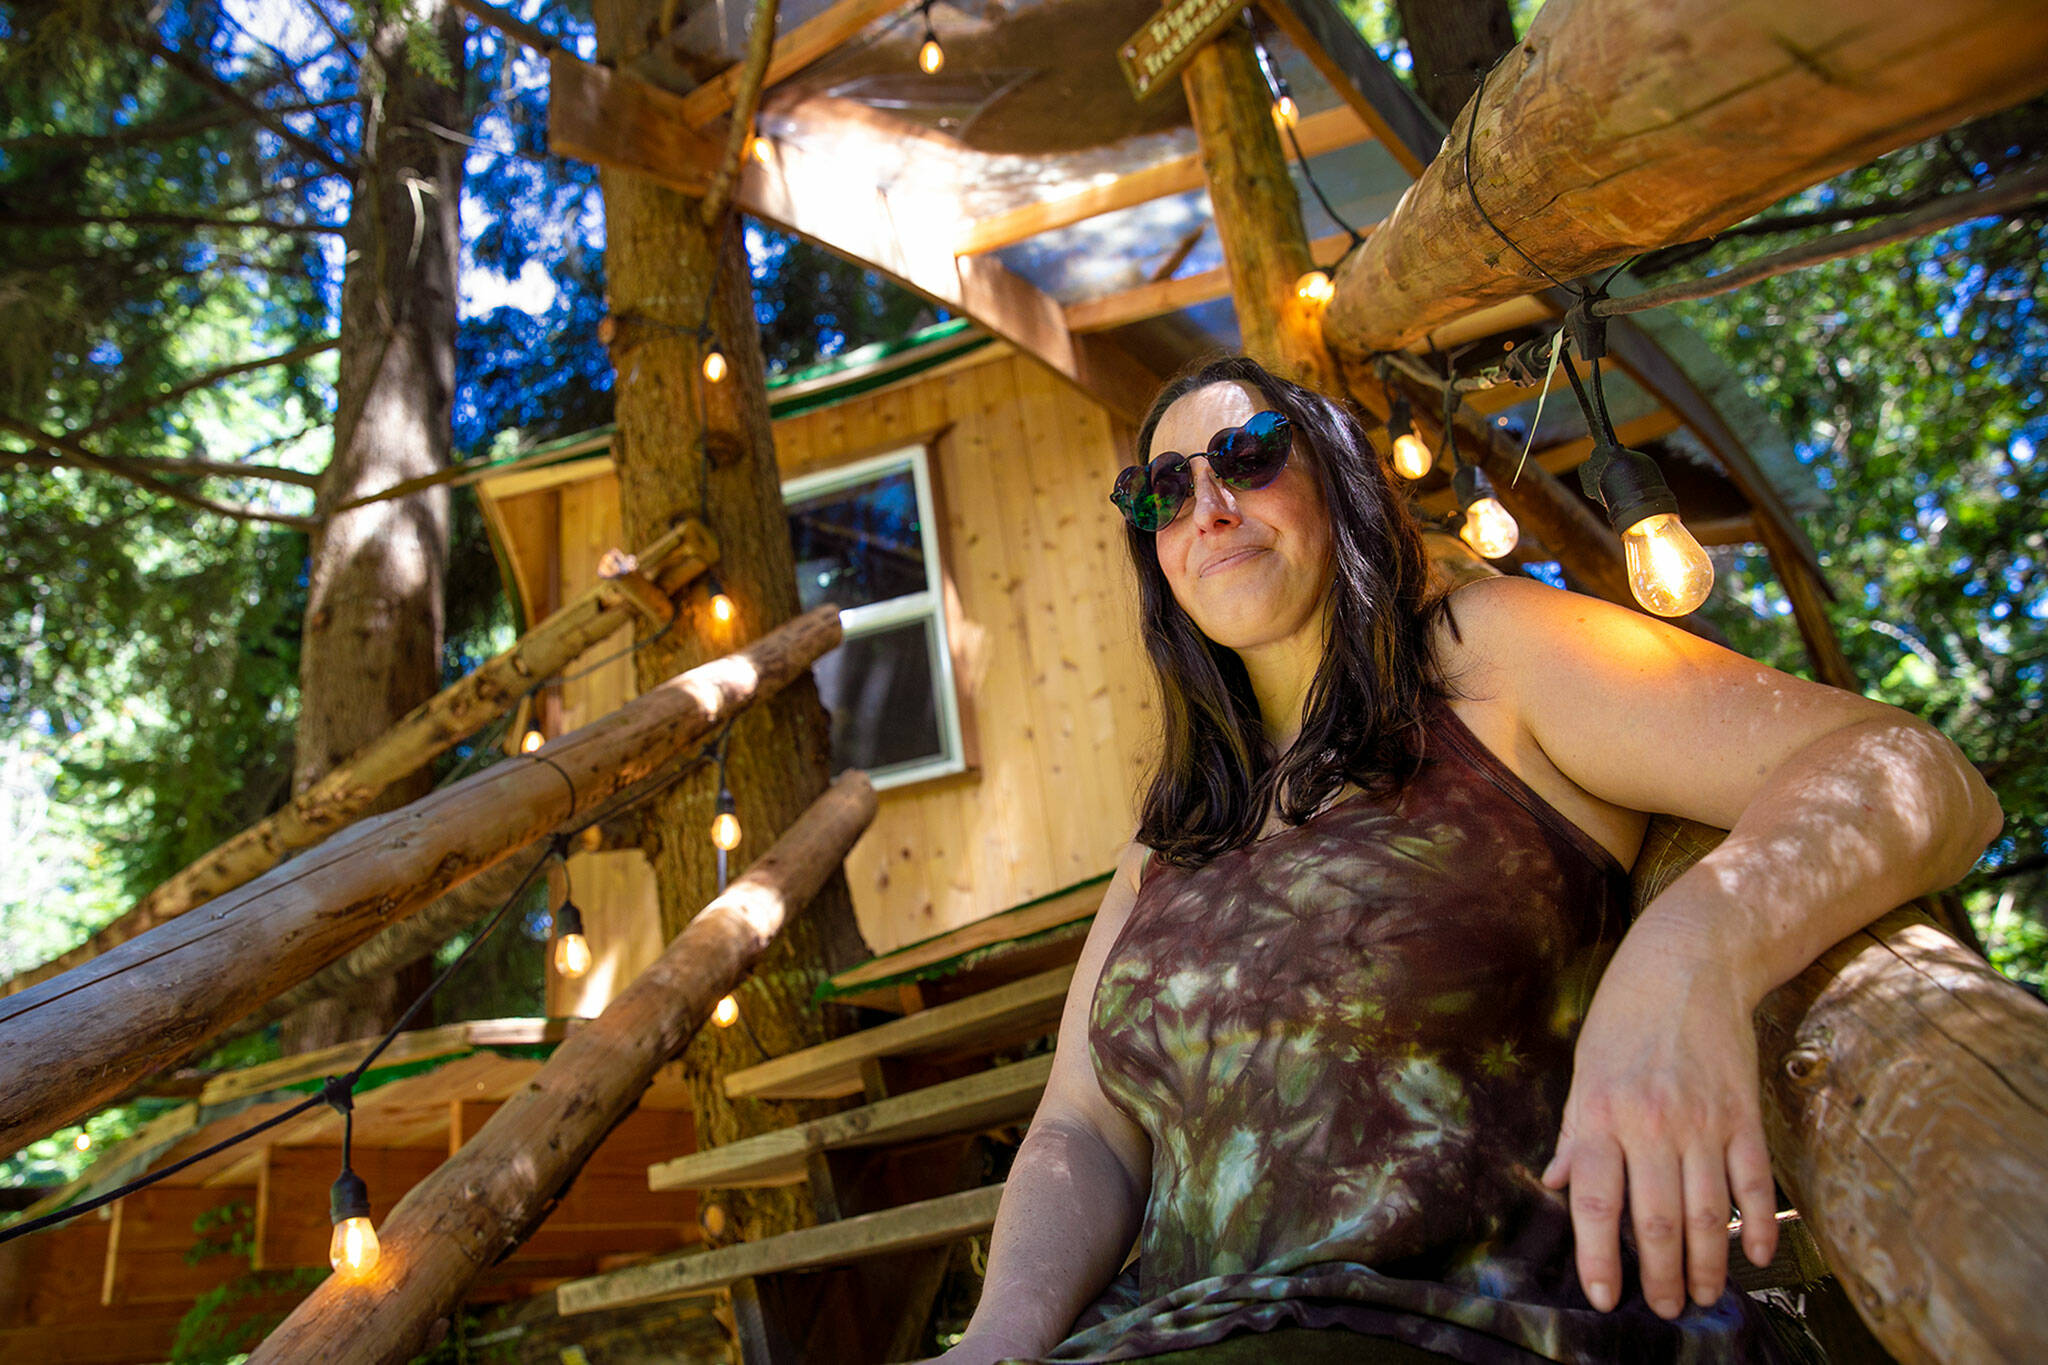 Owner Tracy Rice sits on the steps of the Trippy Treehouse, one of four marijuana-friendly elevated spaces she offers to guests at Mountain Views Tree House BB. (Ryan Berry / The Herald)